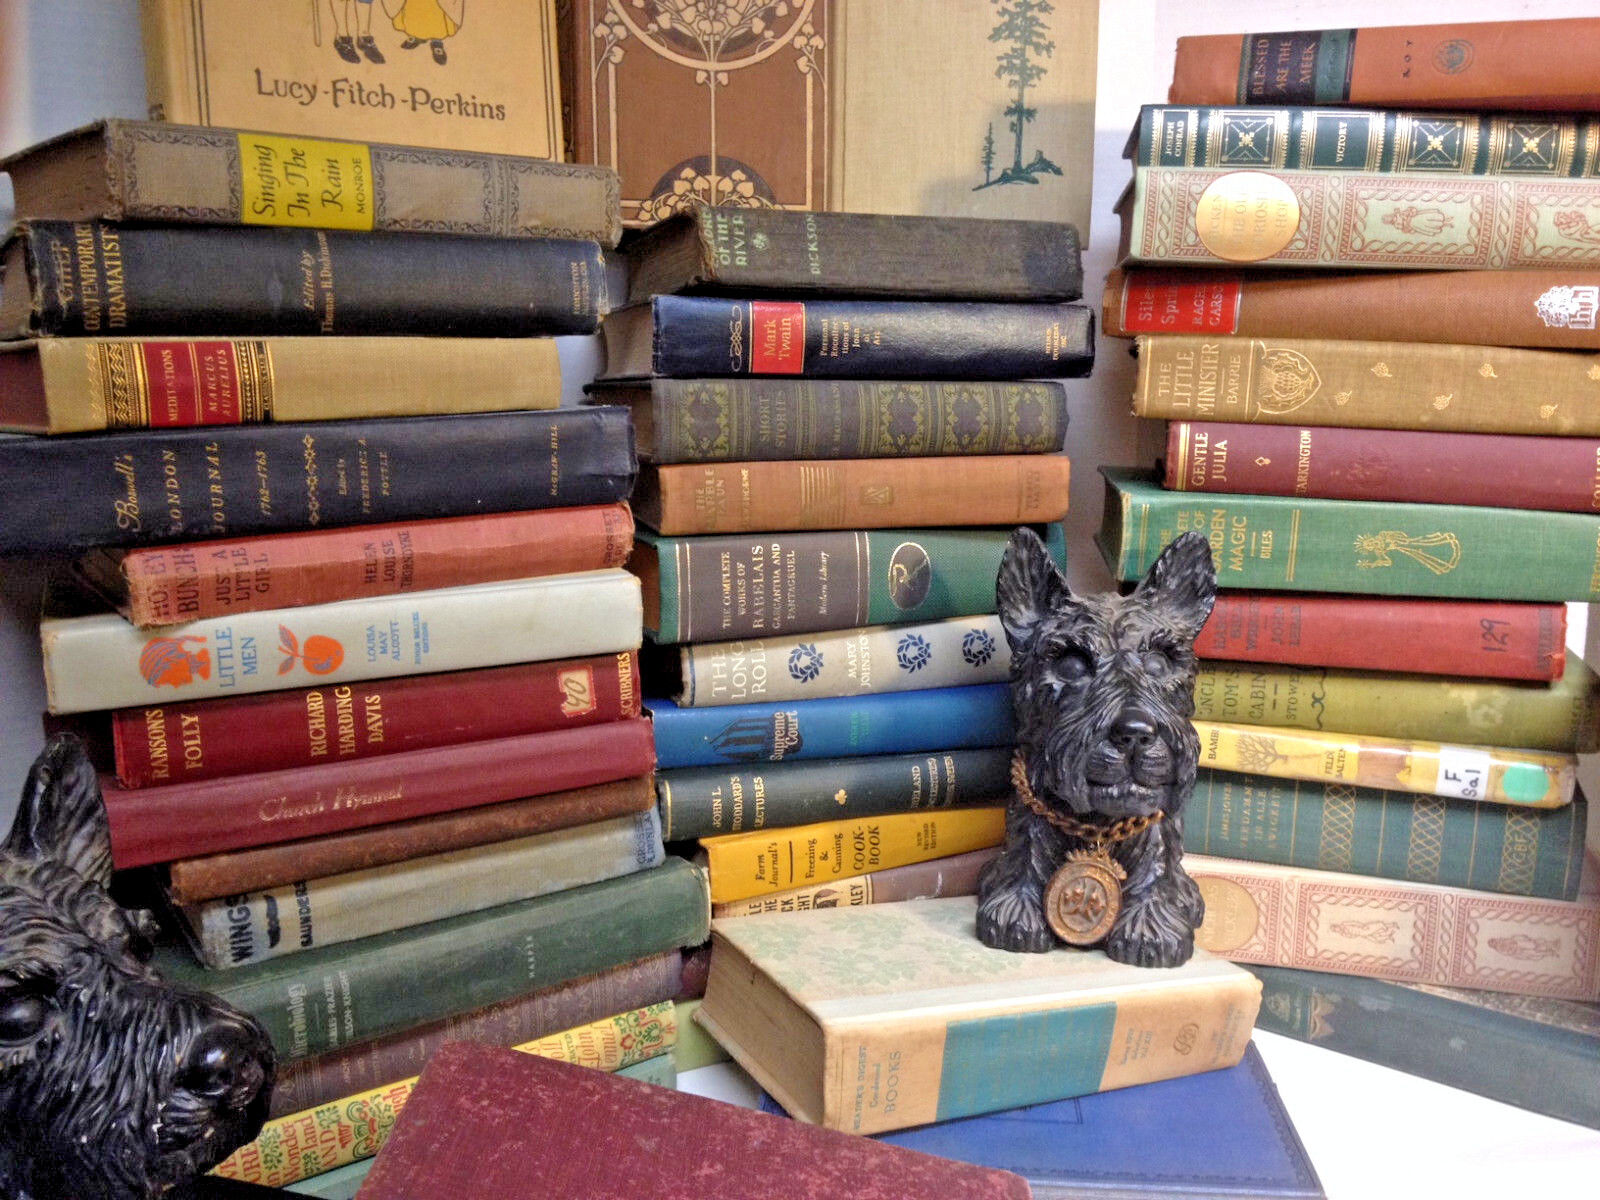 Lot of 10 ANTIQUE Old Books Collection Set UNSORTED MIXED all hardcover Decor